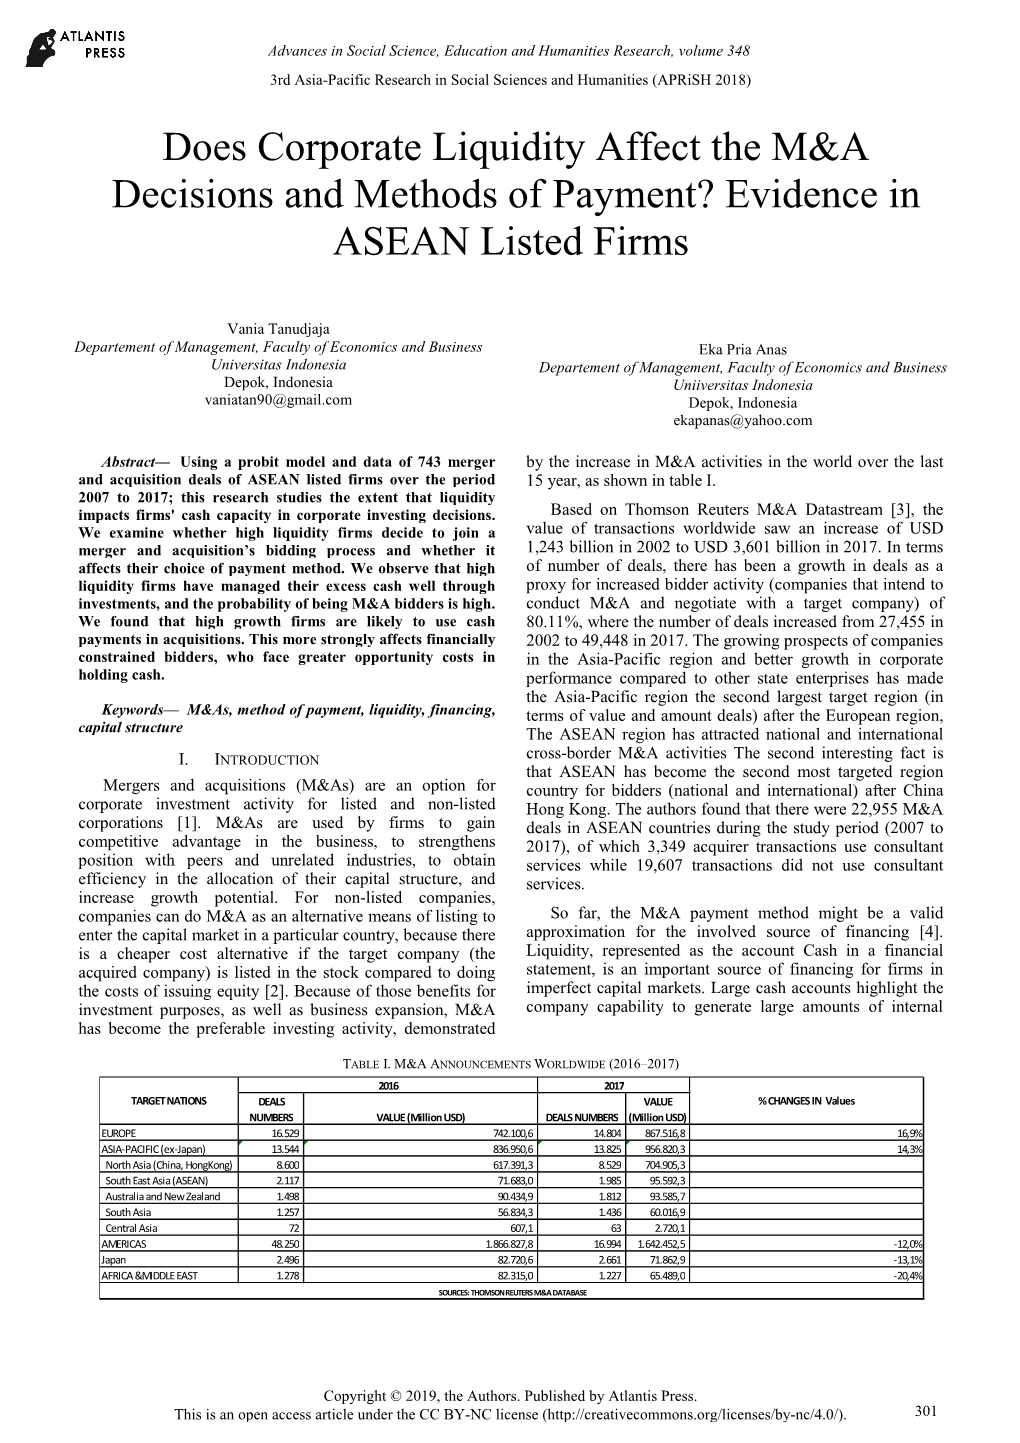 Does Corporate Liquidity Affect the M&A Decisions and Methods Of